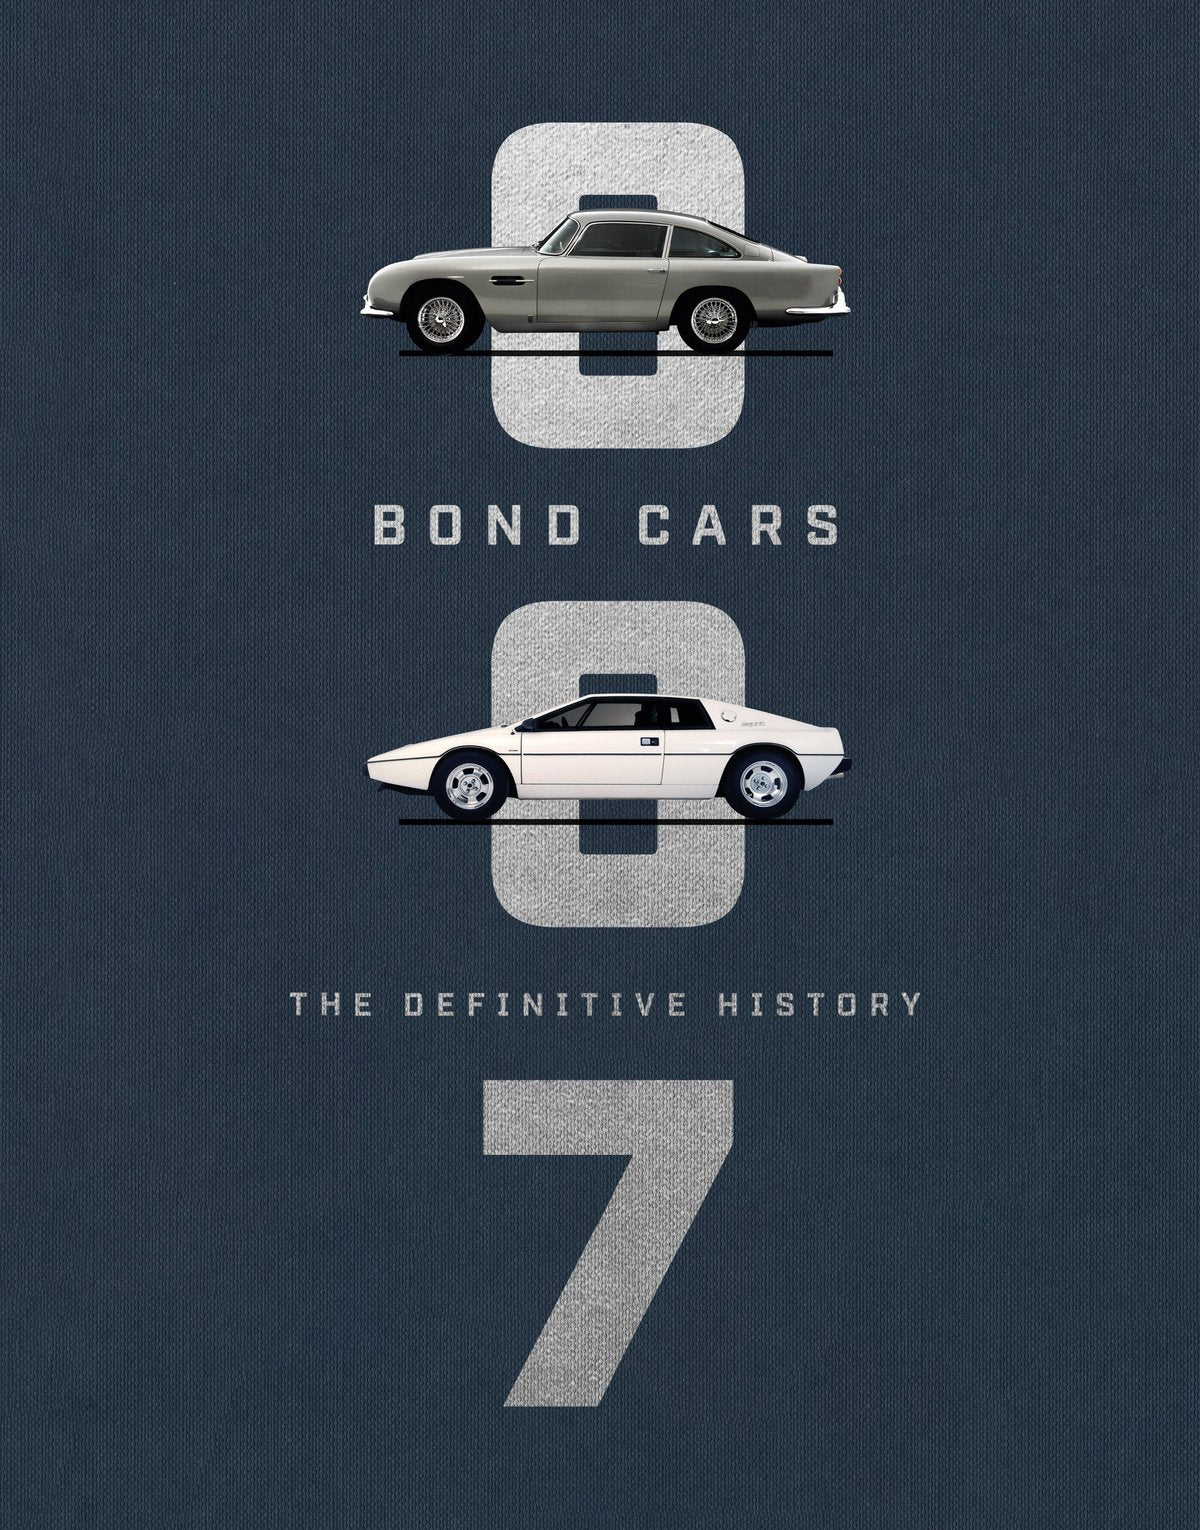 "BOND CARS: THE DEFINITIVE HISTORY" BOOK COLLECTOR'S EDITION BY JASON BARLOW